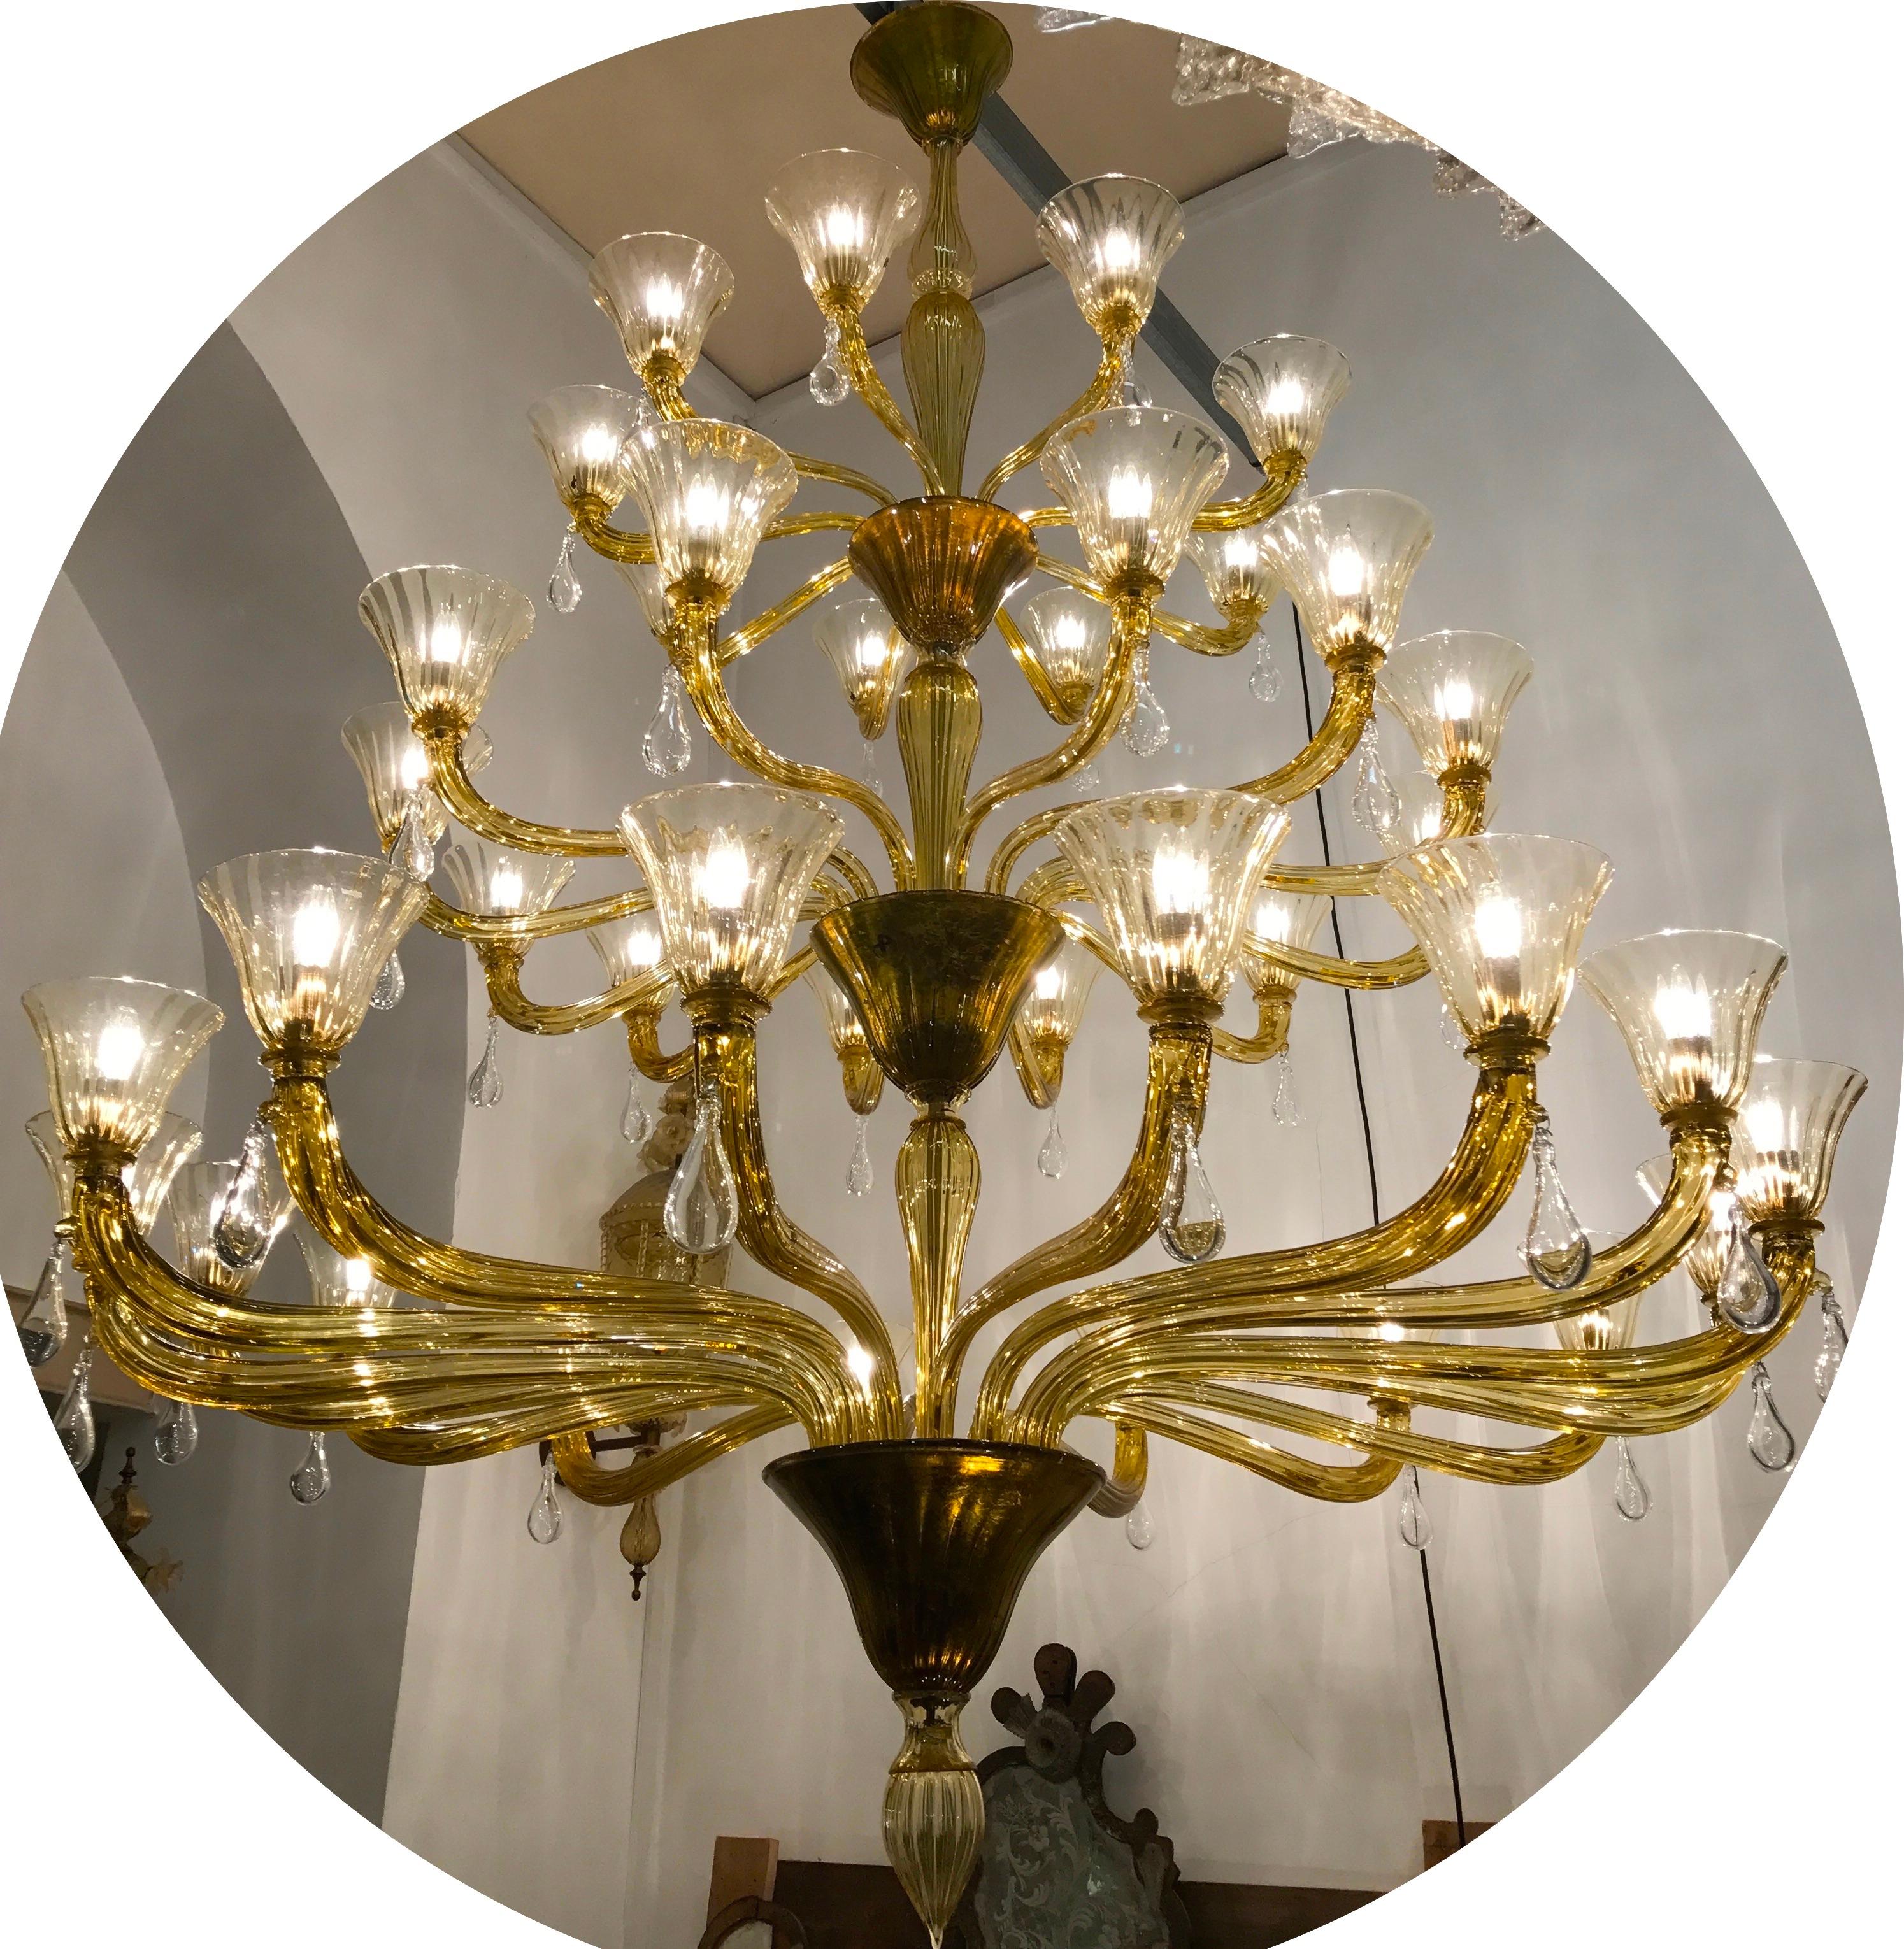 This magnificent chandelier on three levels features 37 arms with glass drops.
Cups with gold inserts. Original Venini stamps.
Cleaned and re-wired, in full working order and ready to use. In excellent vintage condition. All original glasses in